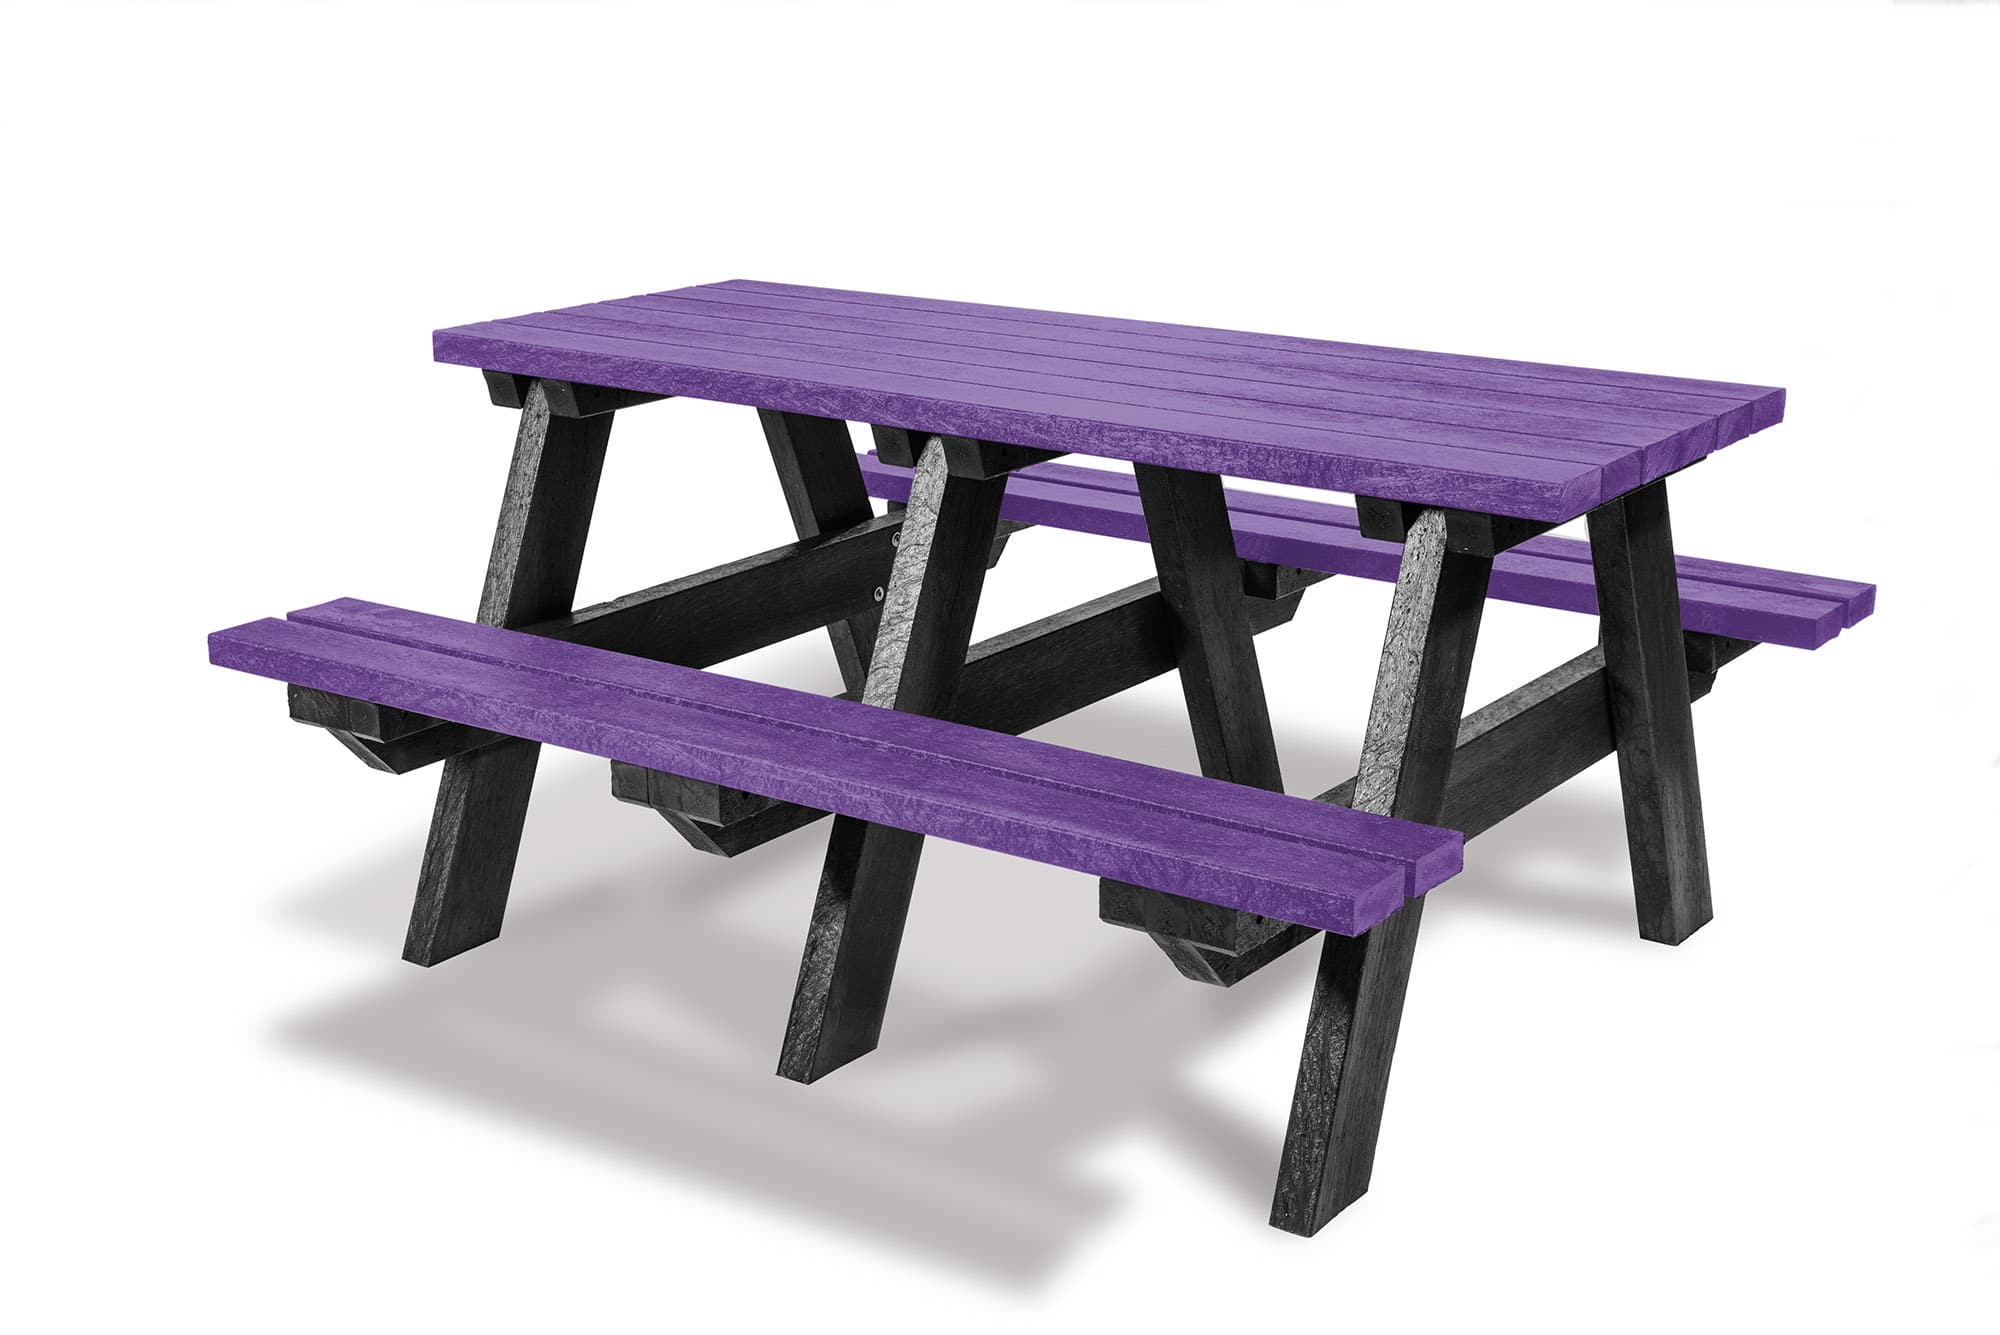 The Denholme classic recycled plastic A-frame adult picnic table, seen here in purple